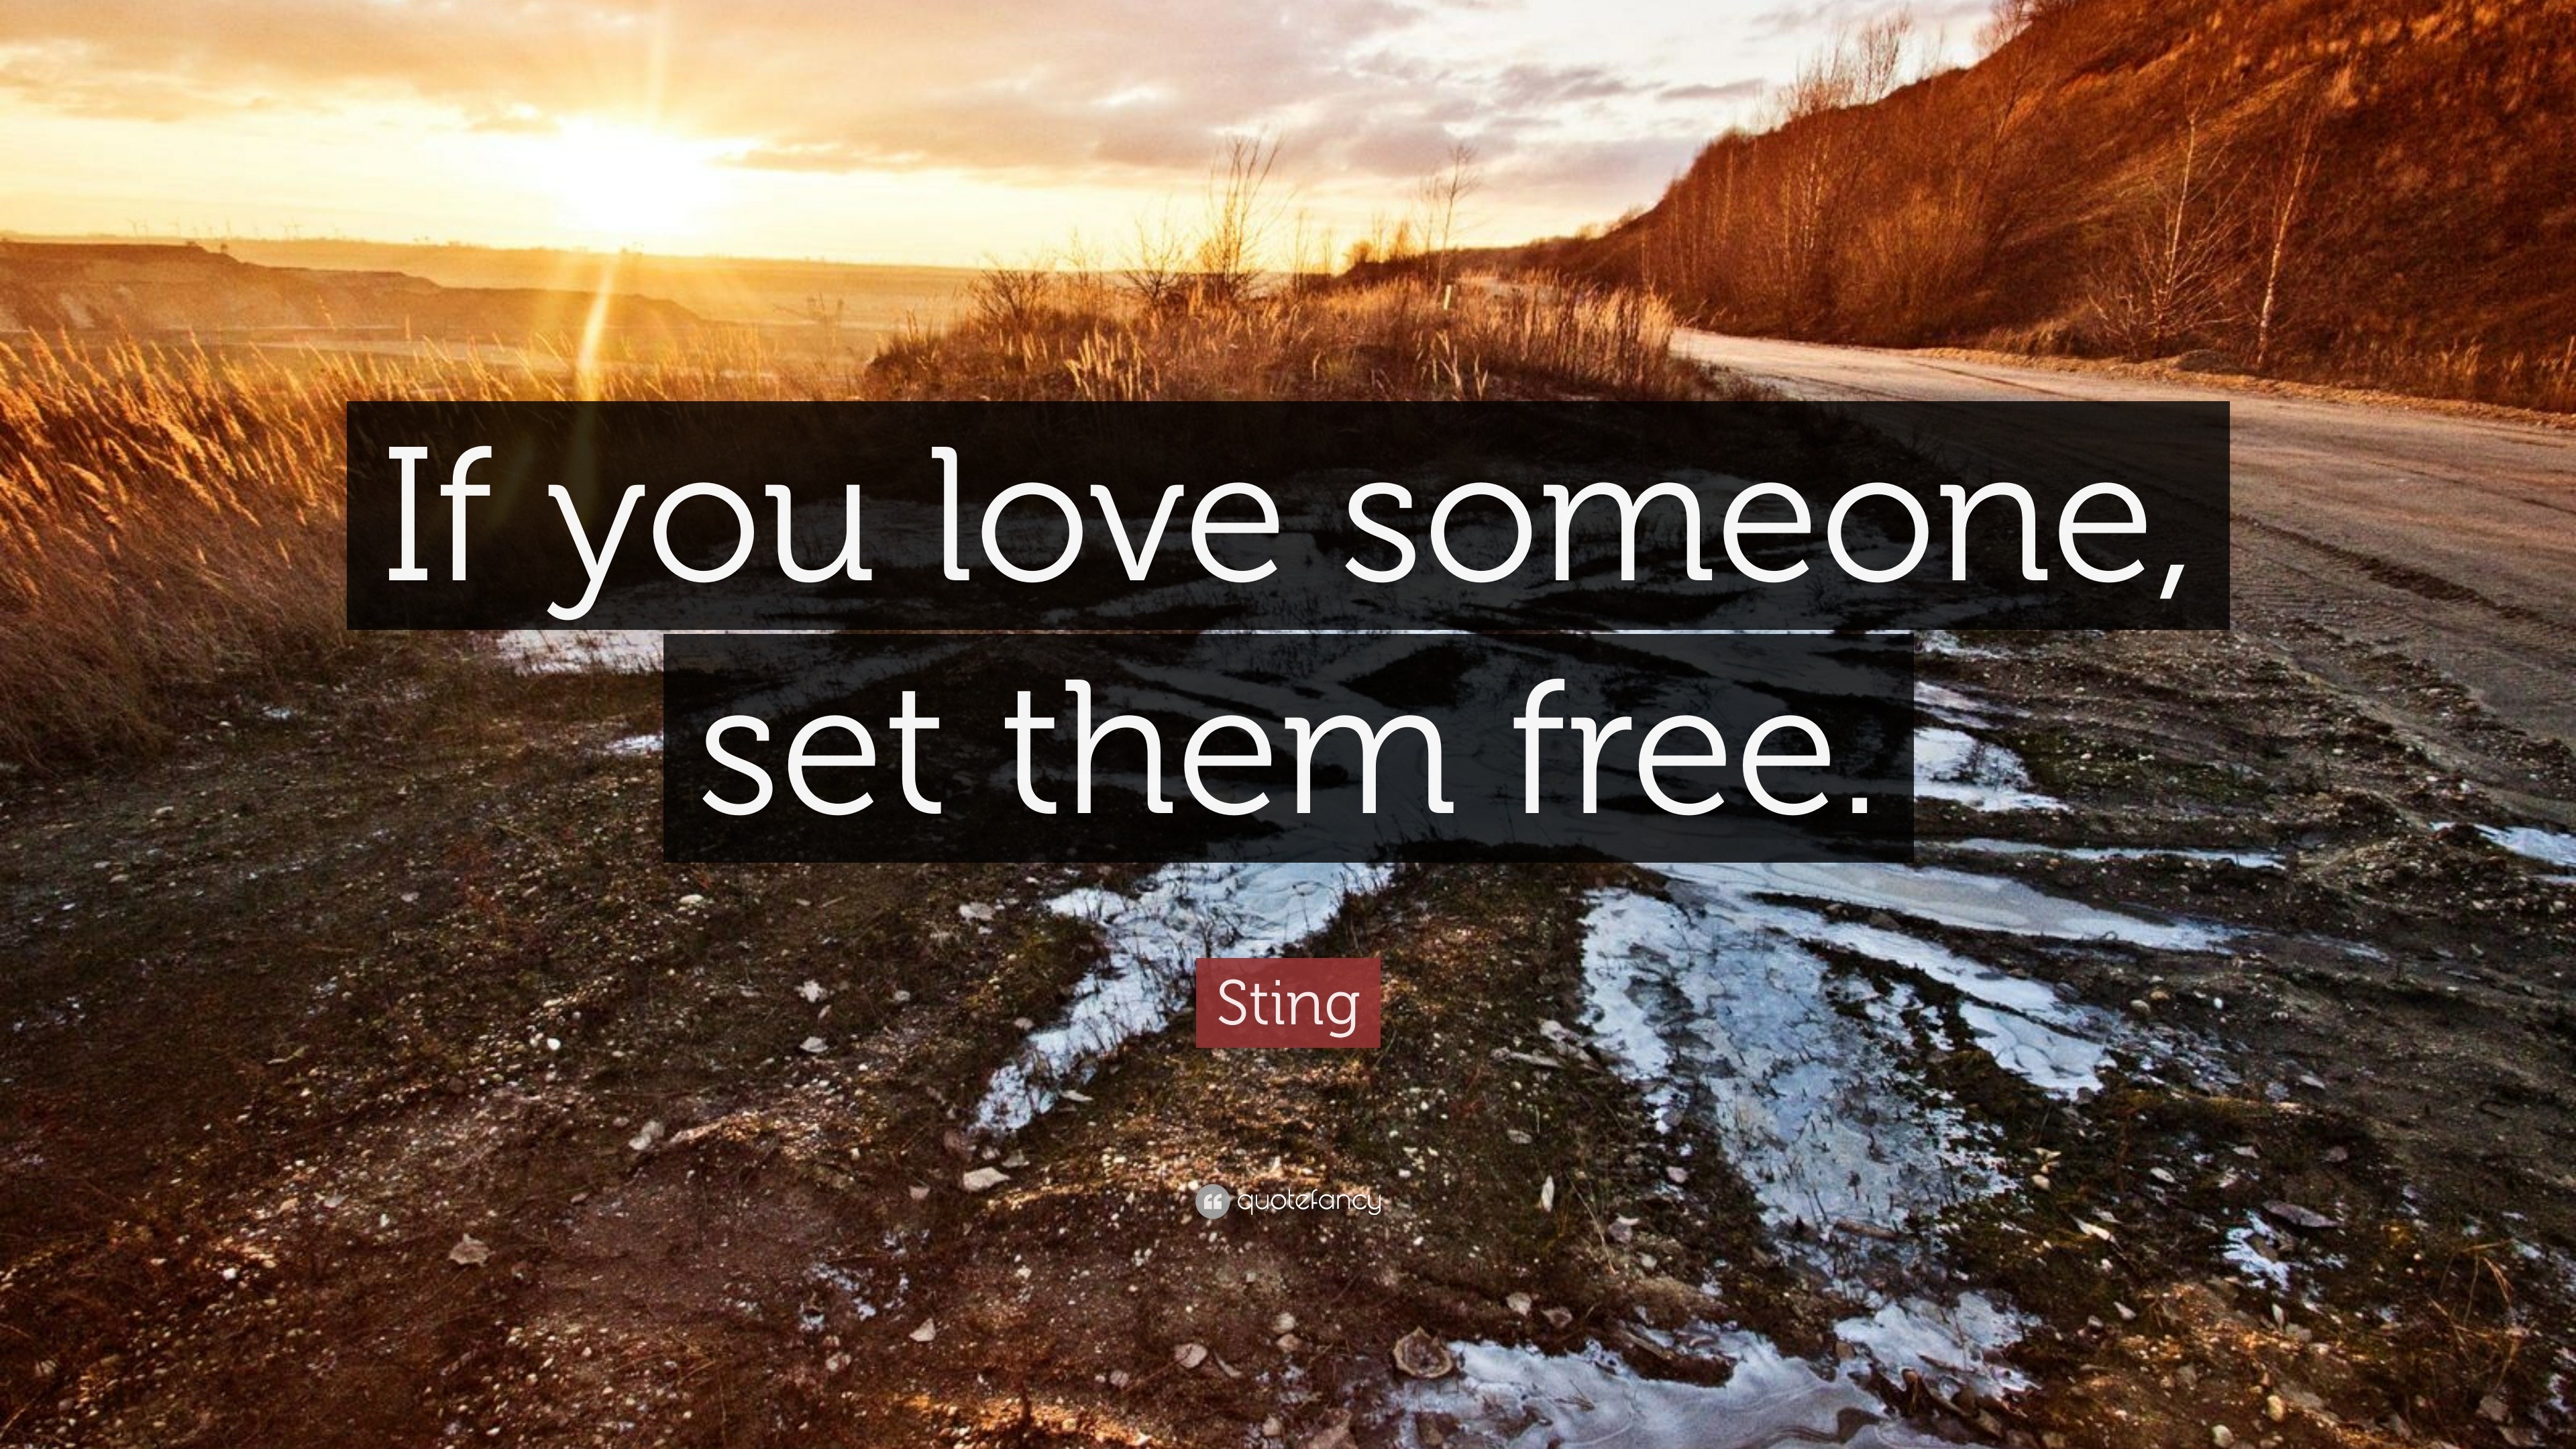 Sting Quote “If you love someone set them free ”